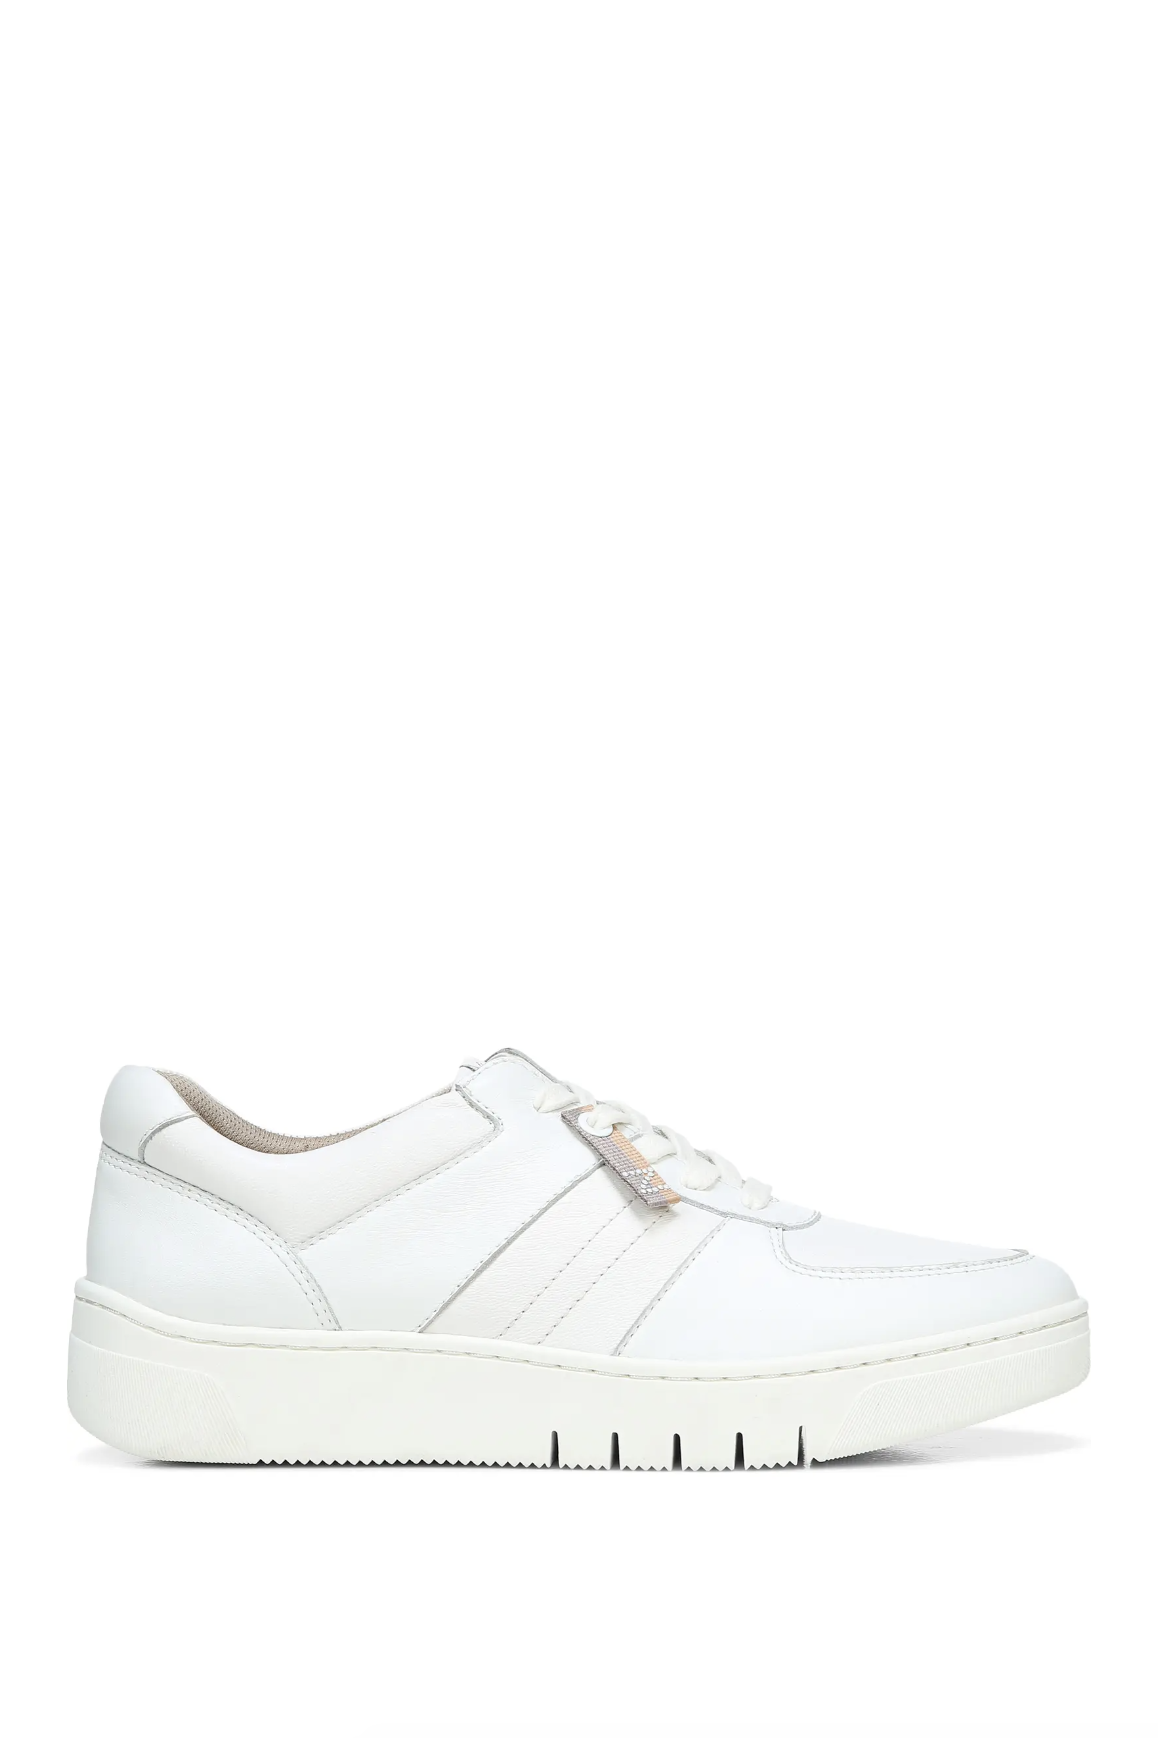 hottest white sneakers 219